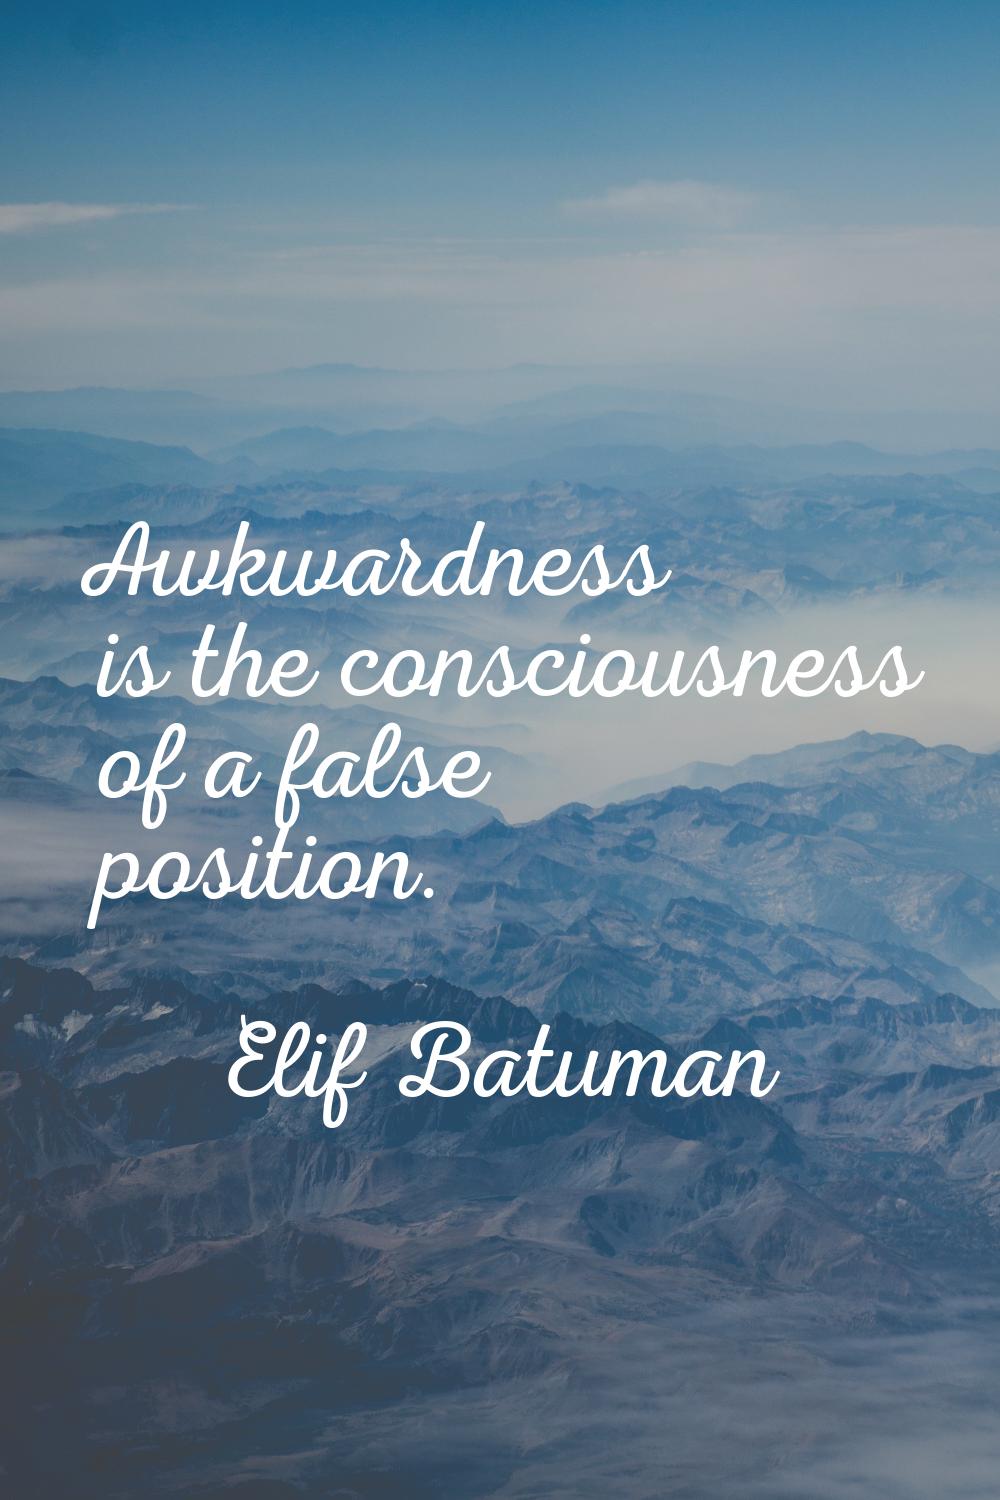 Awkwardness is the consciousness of a false position.